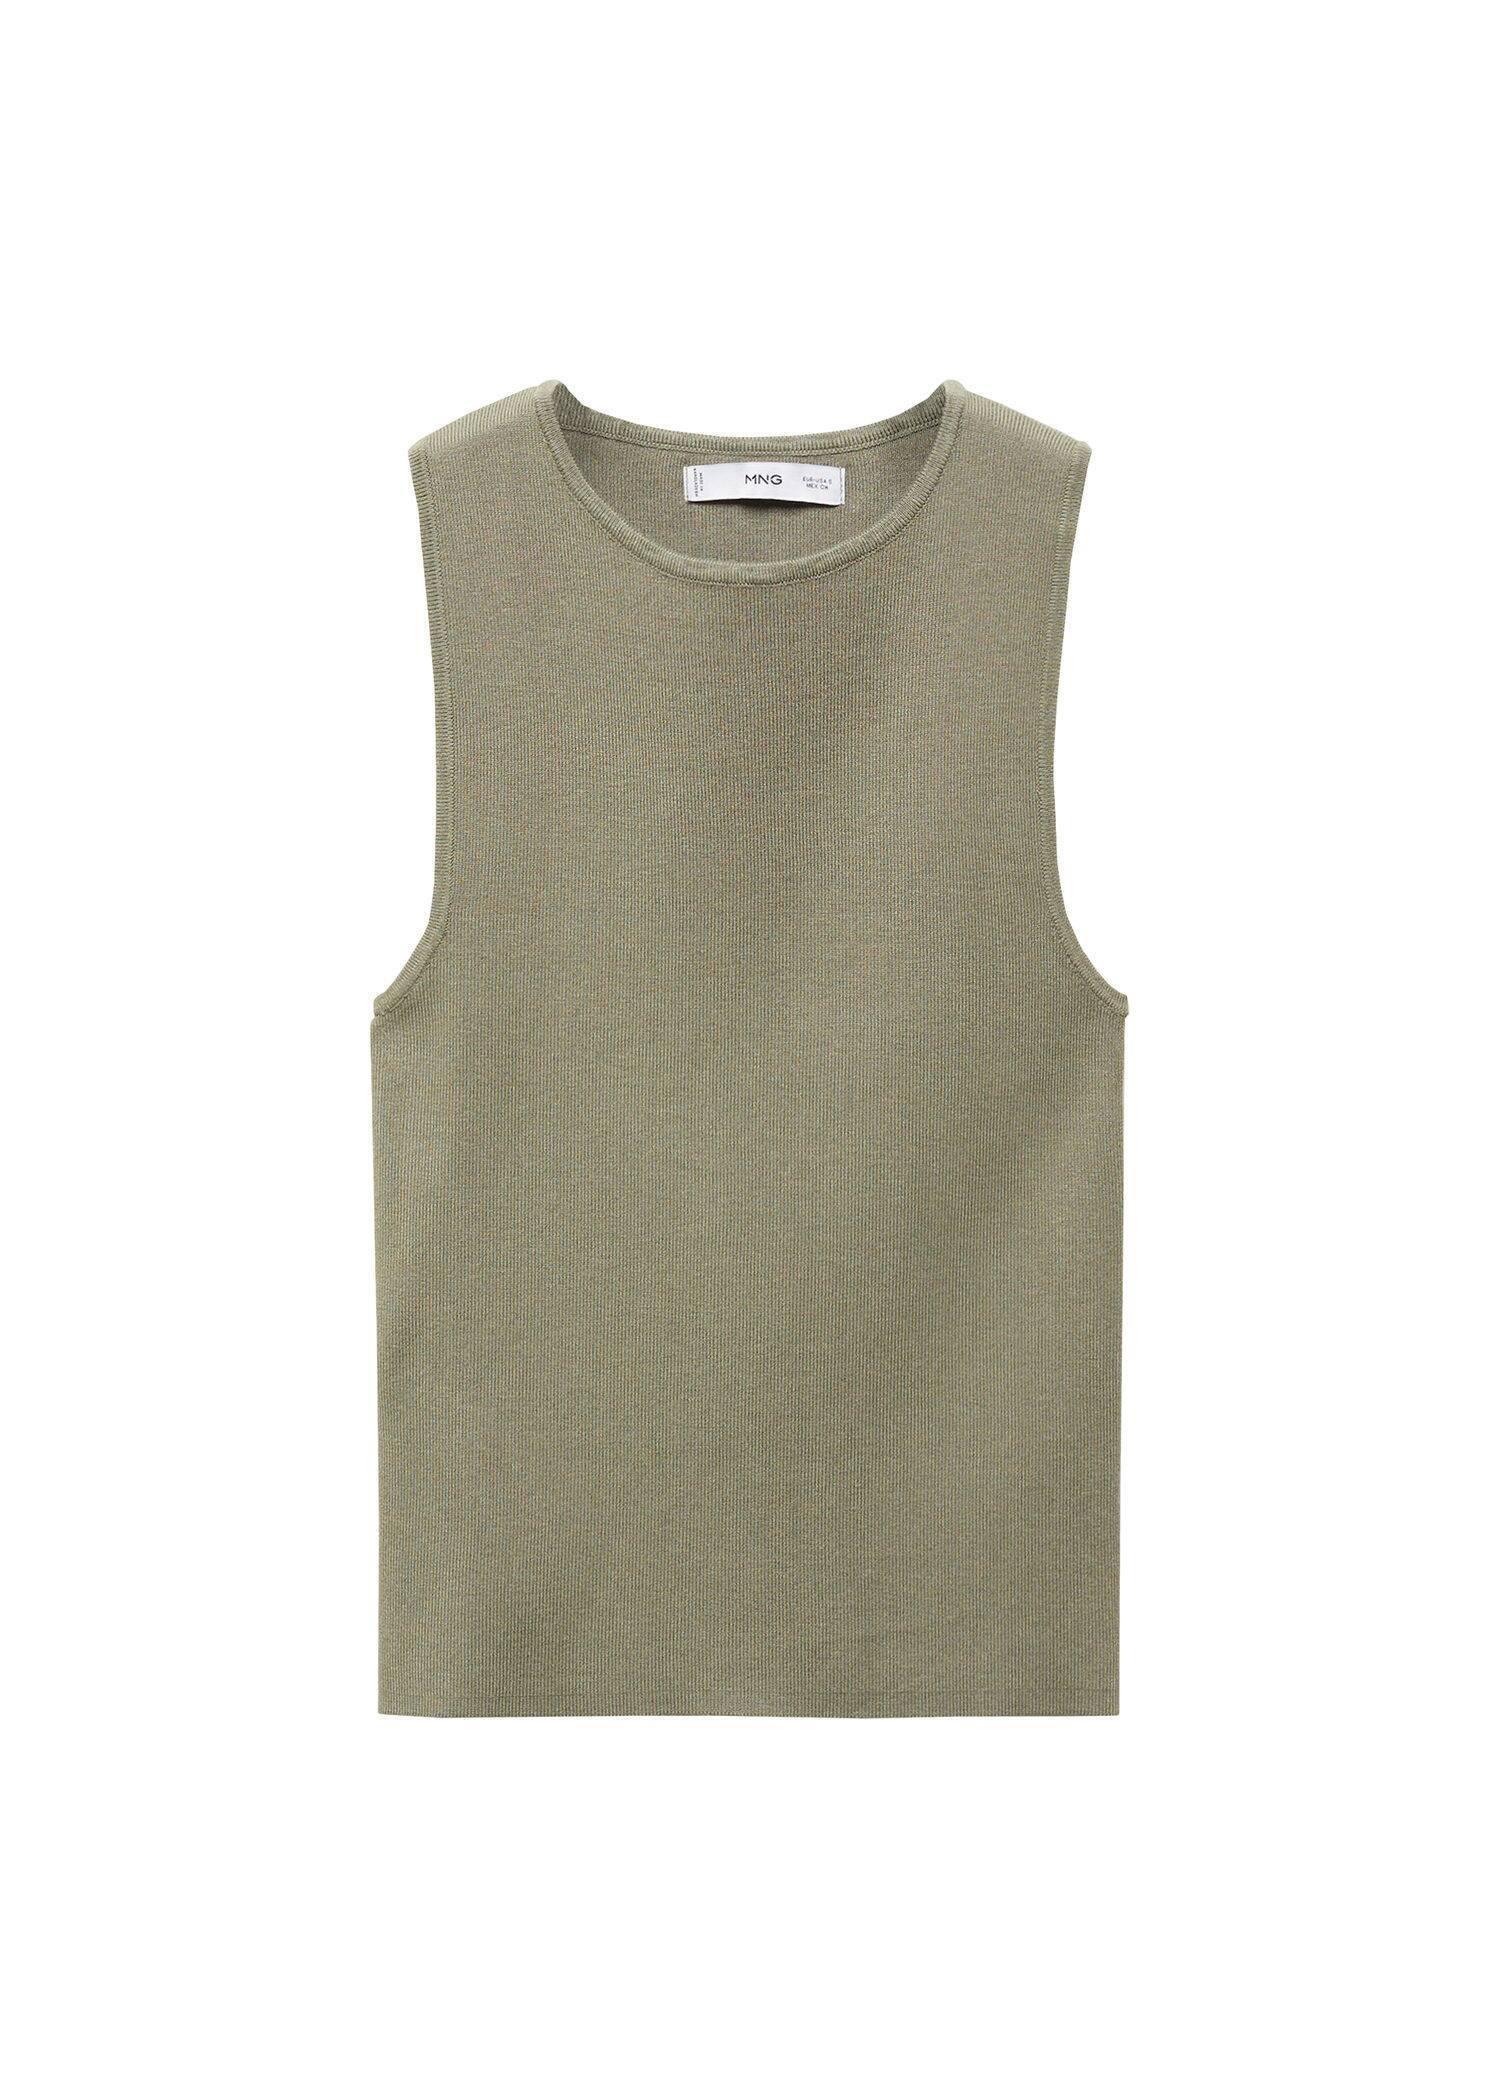 Mango - Khaki Knitted Top With Wide Straps